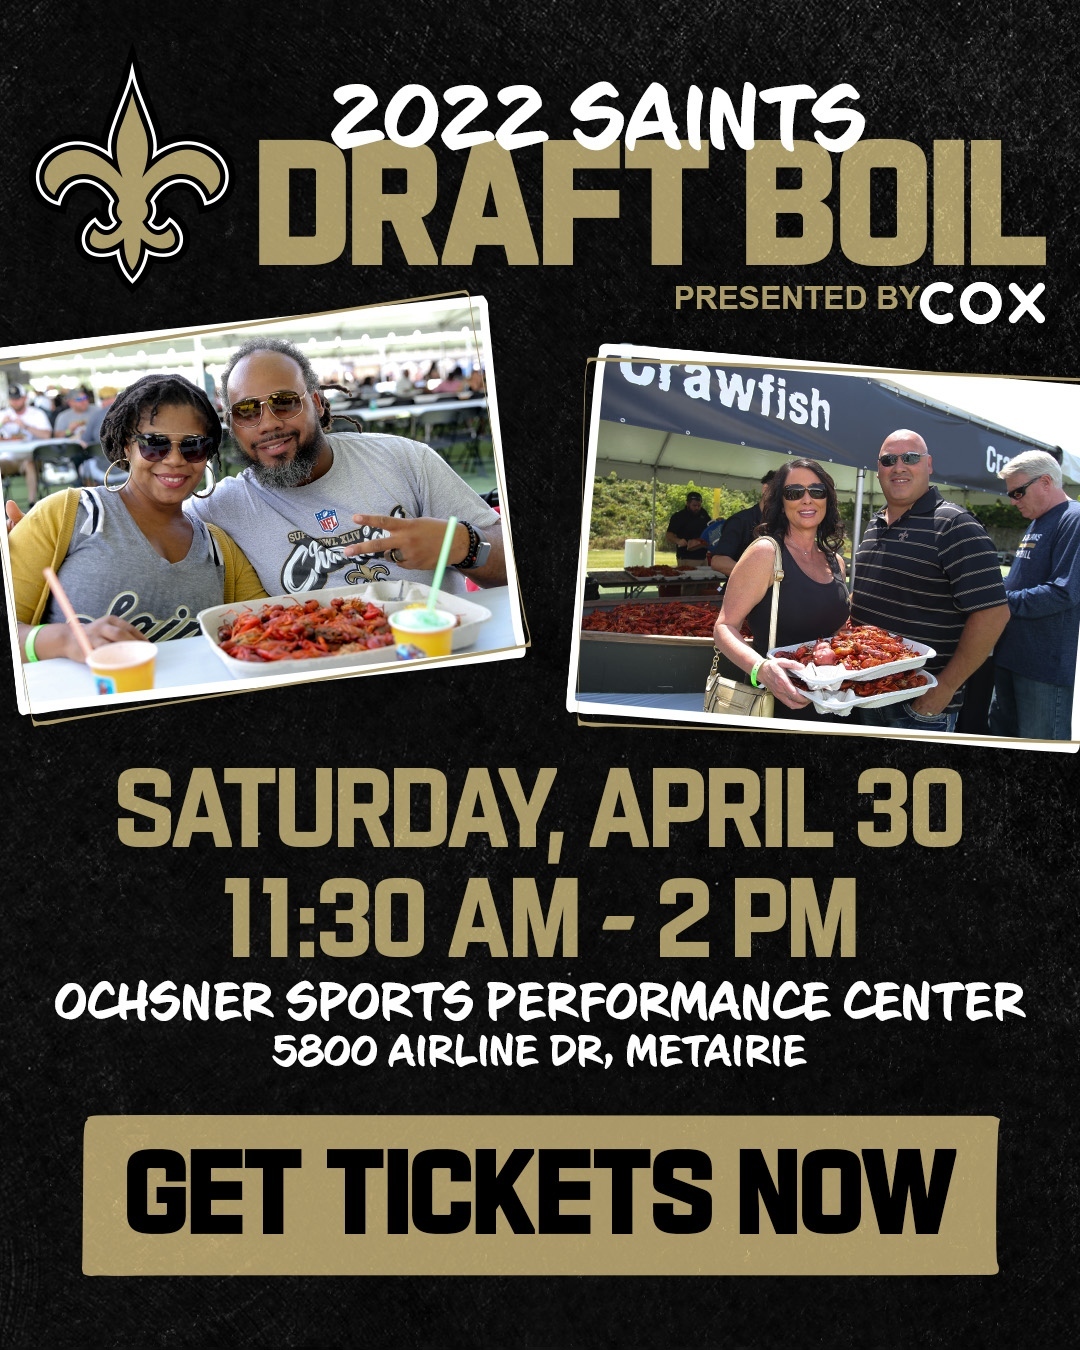 Join fellow fans, players and team legends at the Ochsner Sports Performance Cen...